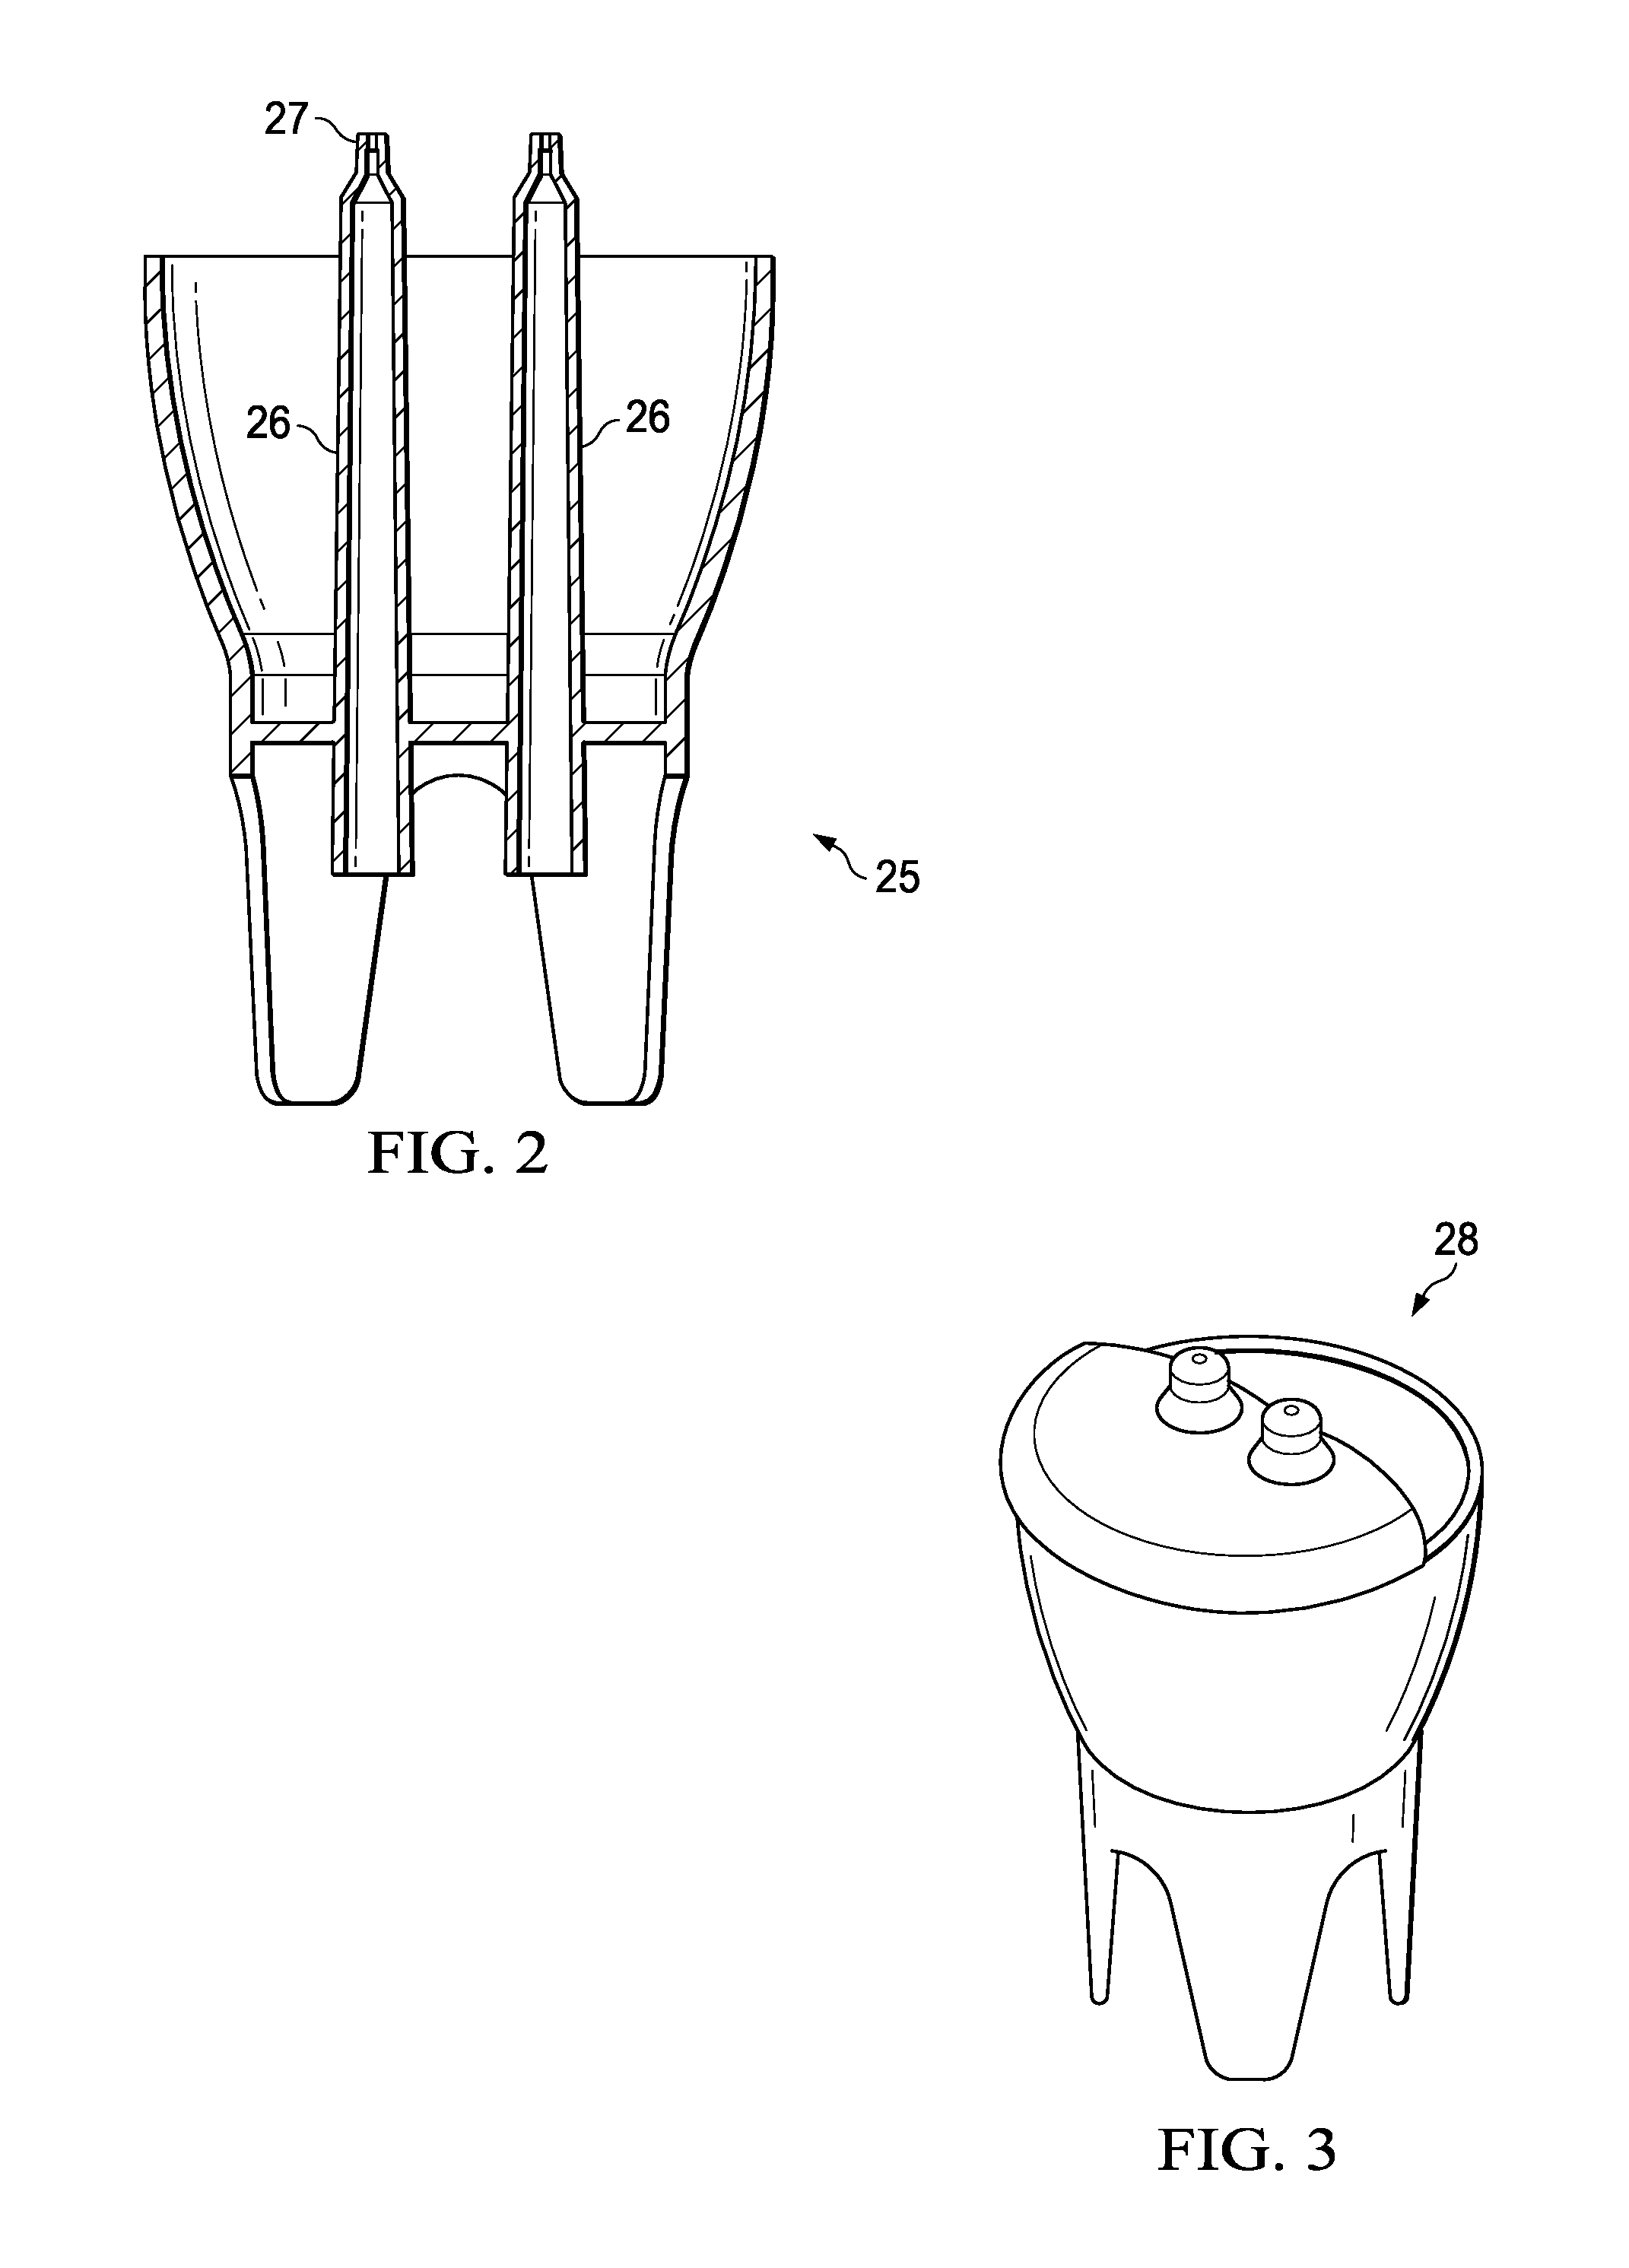 Portable Fluid Delivery System for the Nasal and Paranasal Sinus Cavities